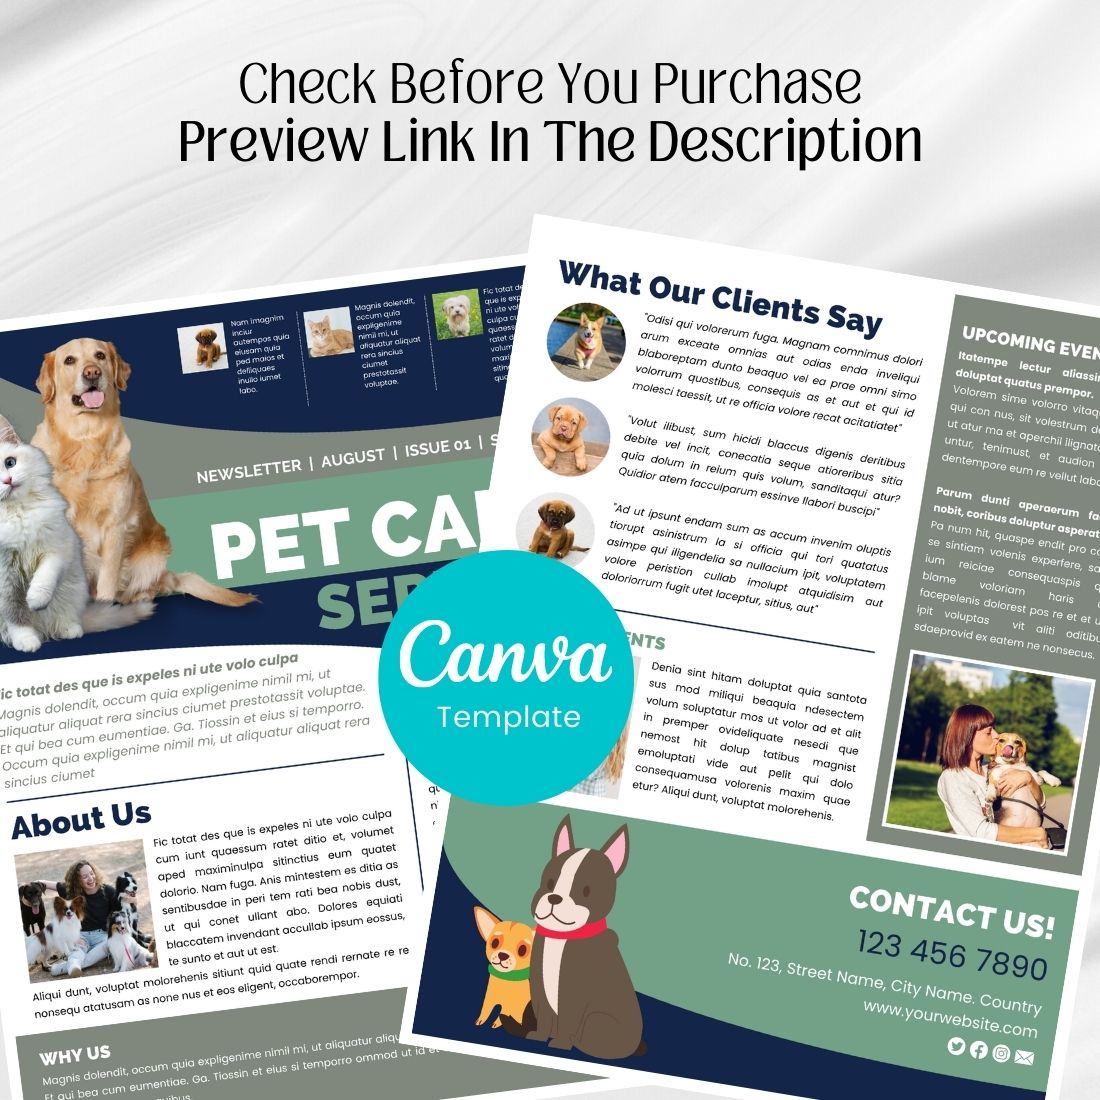 Canva Newsletter Template For Pet Care Business cover image.